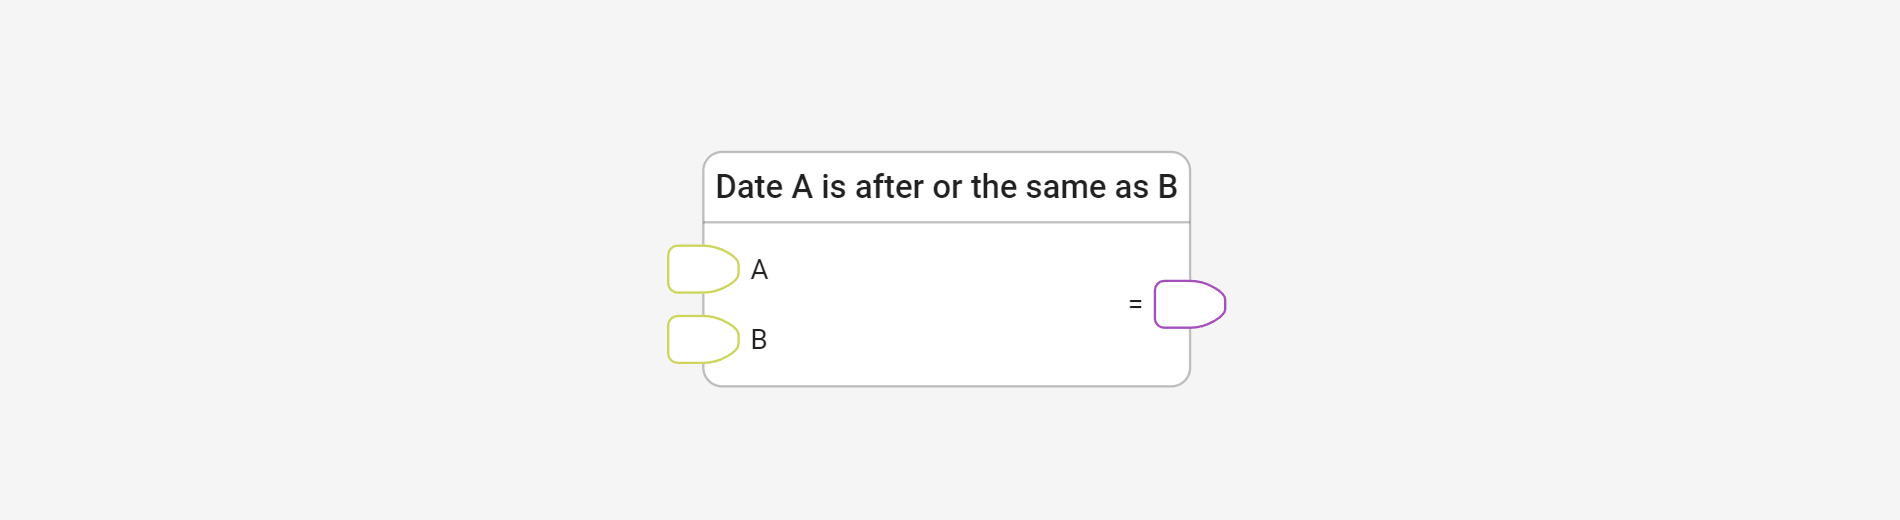 Check date using Date A is after or the same as B